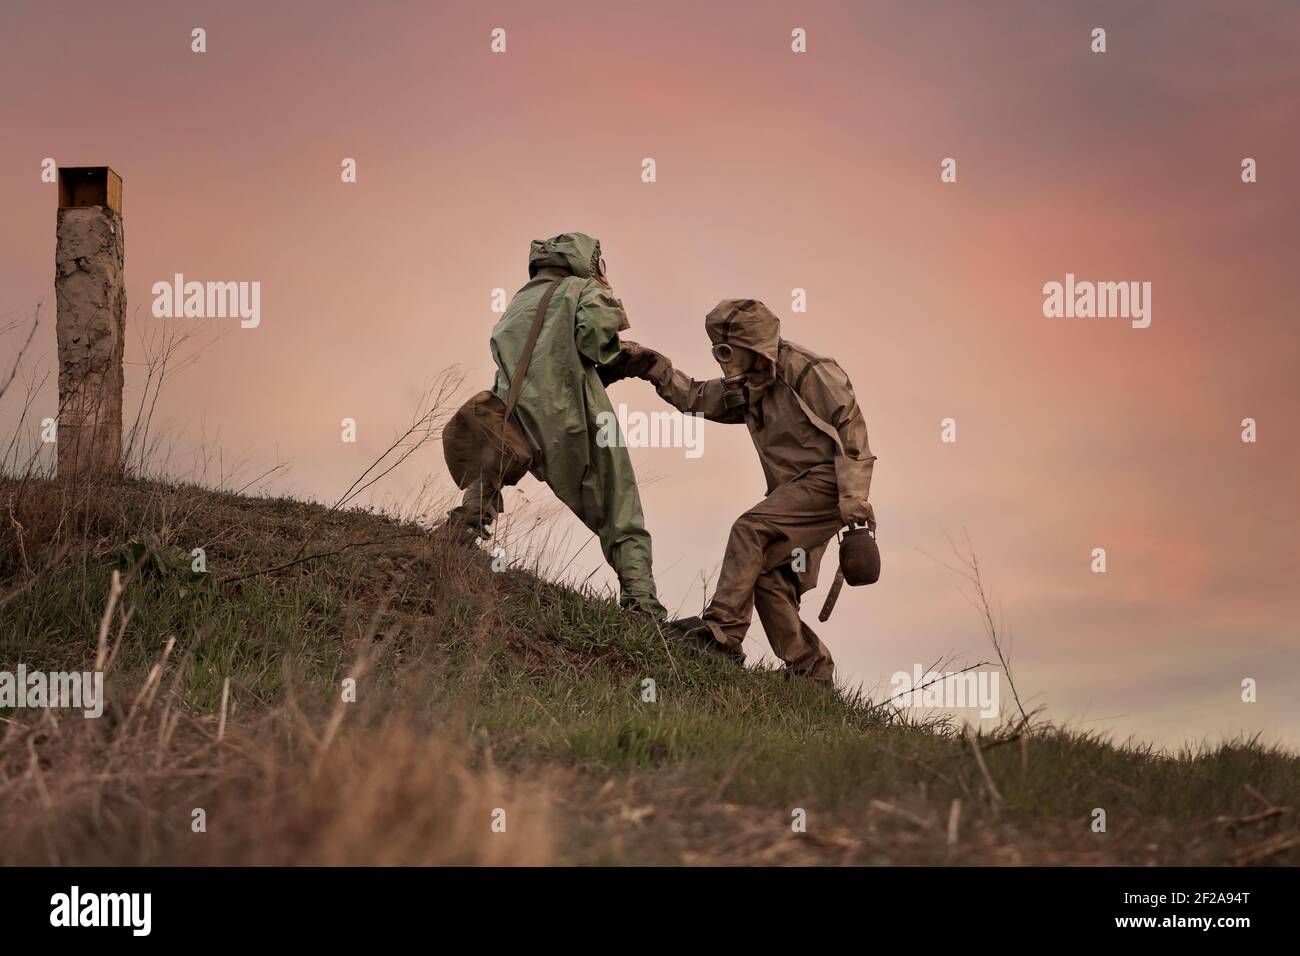 A man in a gas mask and a chemical protection suit helps another person to walk. Post-apocalypse after nuclear war and radiation pollution.  Stock Photo